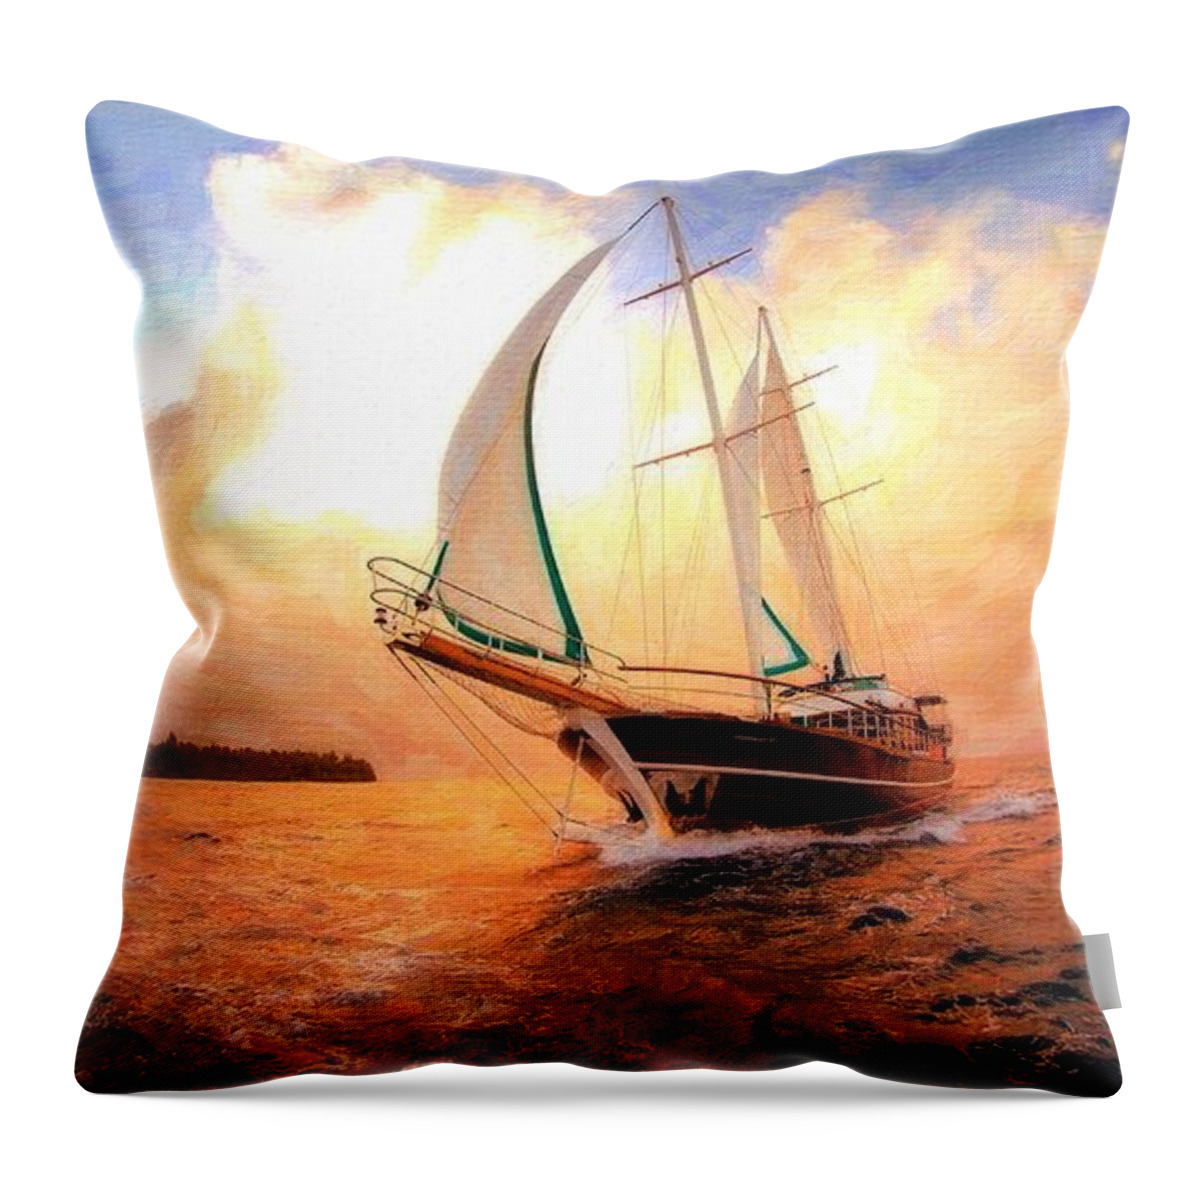 Full Sail Throw Pillow featuring the digital art In Full sail - oil painting edition by Lilia D